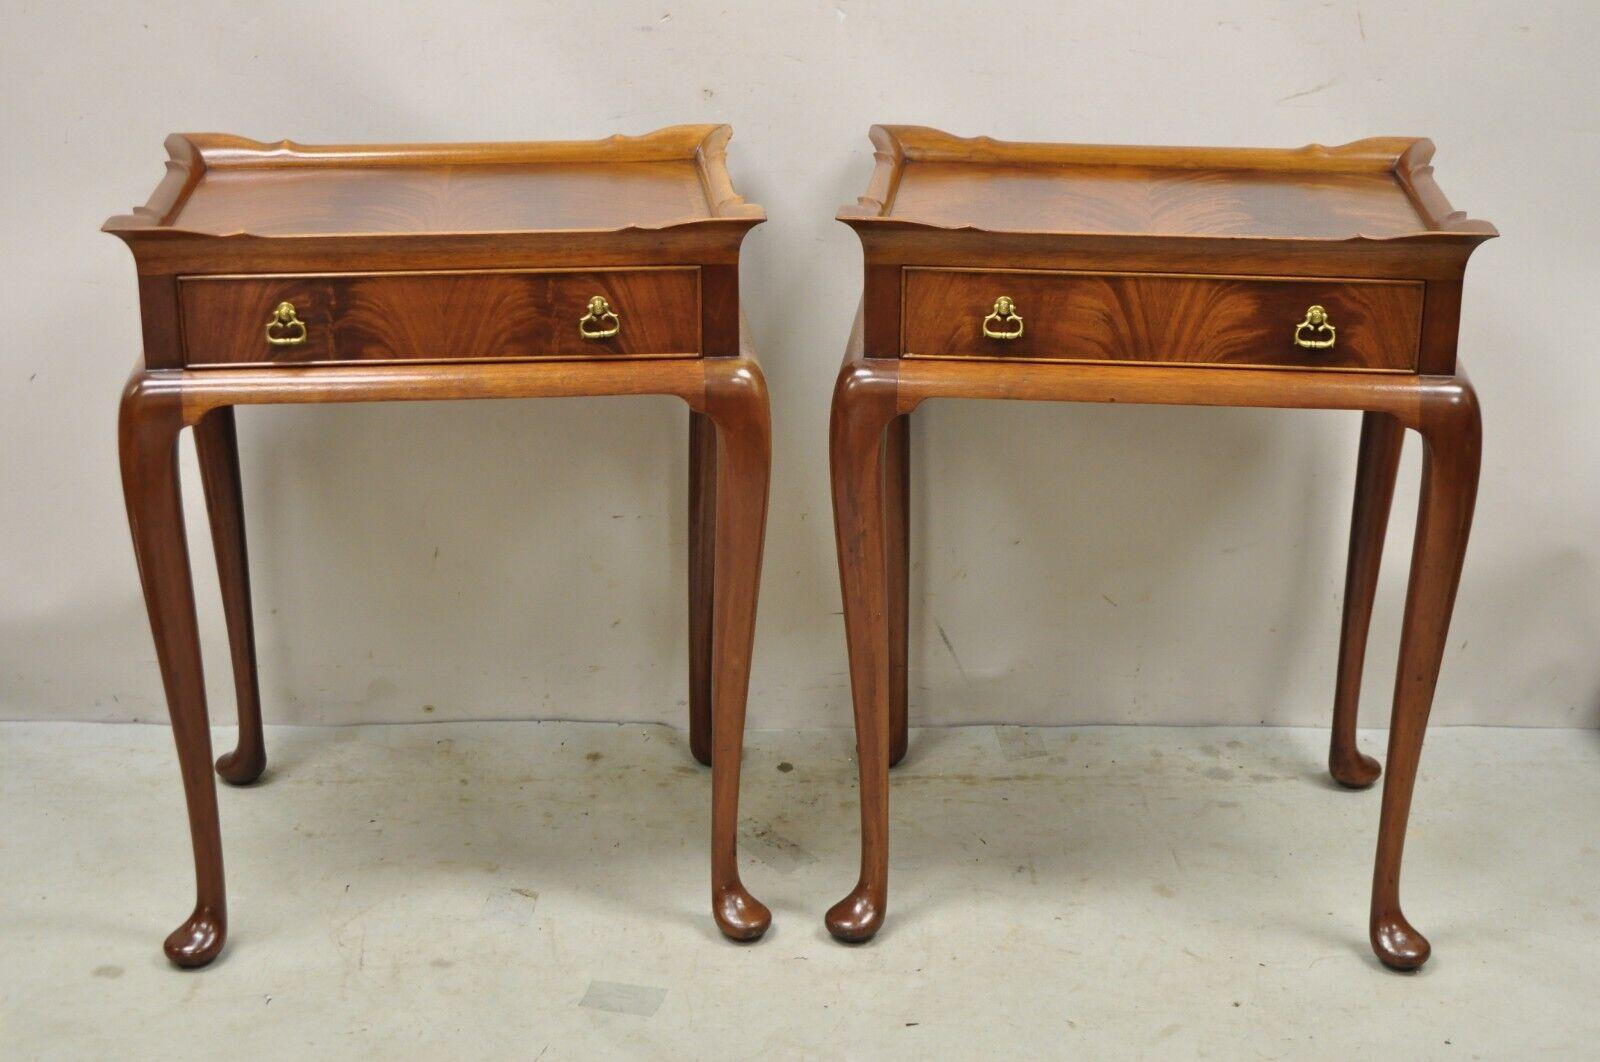 Vintage Chippendale Style Flame Mahogany One Drawer Nightstands - a Pair. Item features a carved raised galley, beautiful flame mahogany grain, finished back, 1 dovetailed drawer, shapely Queen Anne legs, very nice vintage pair. Circa Early to Mid